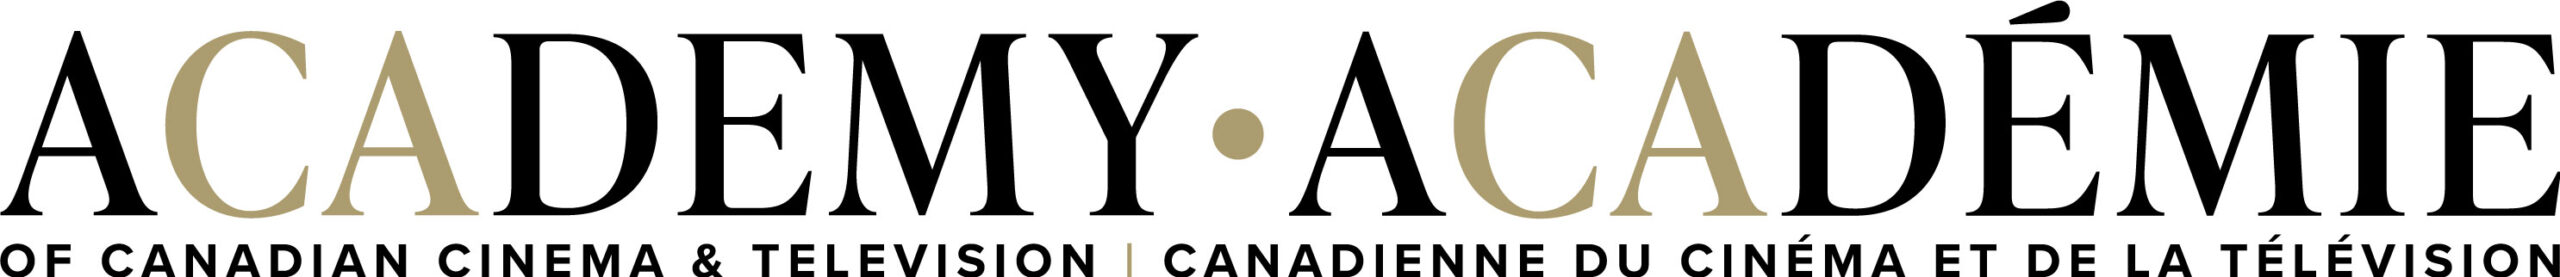 The Academy of Canadian Cinema & Television